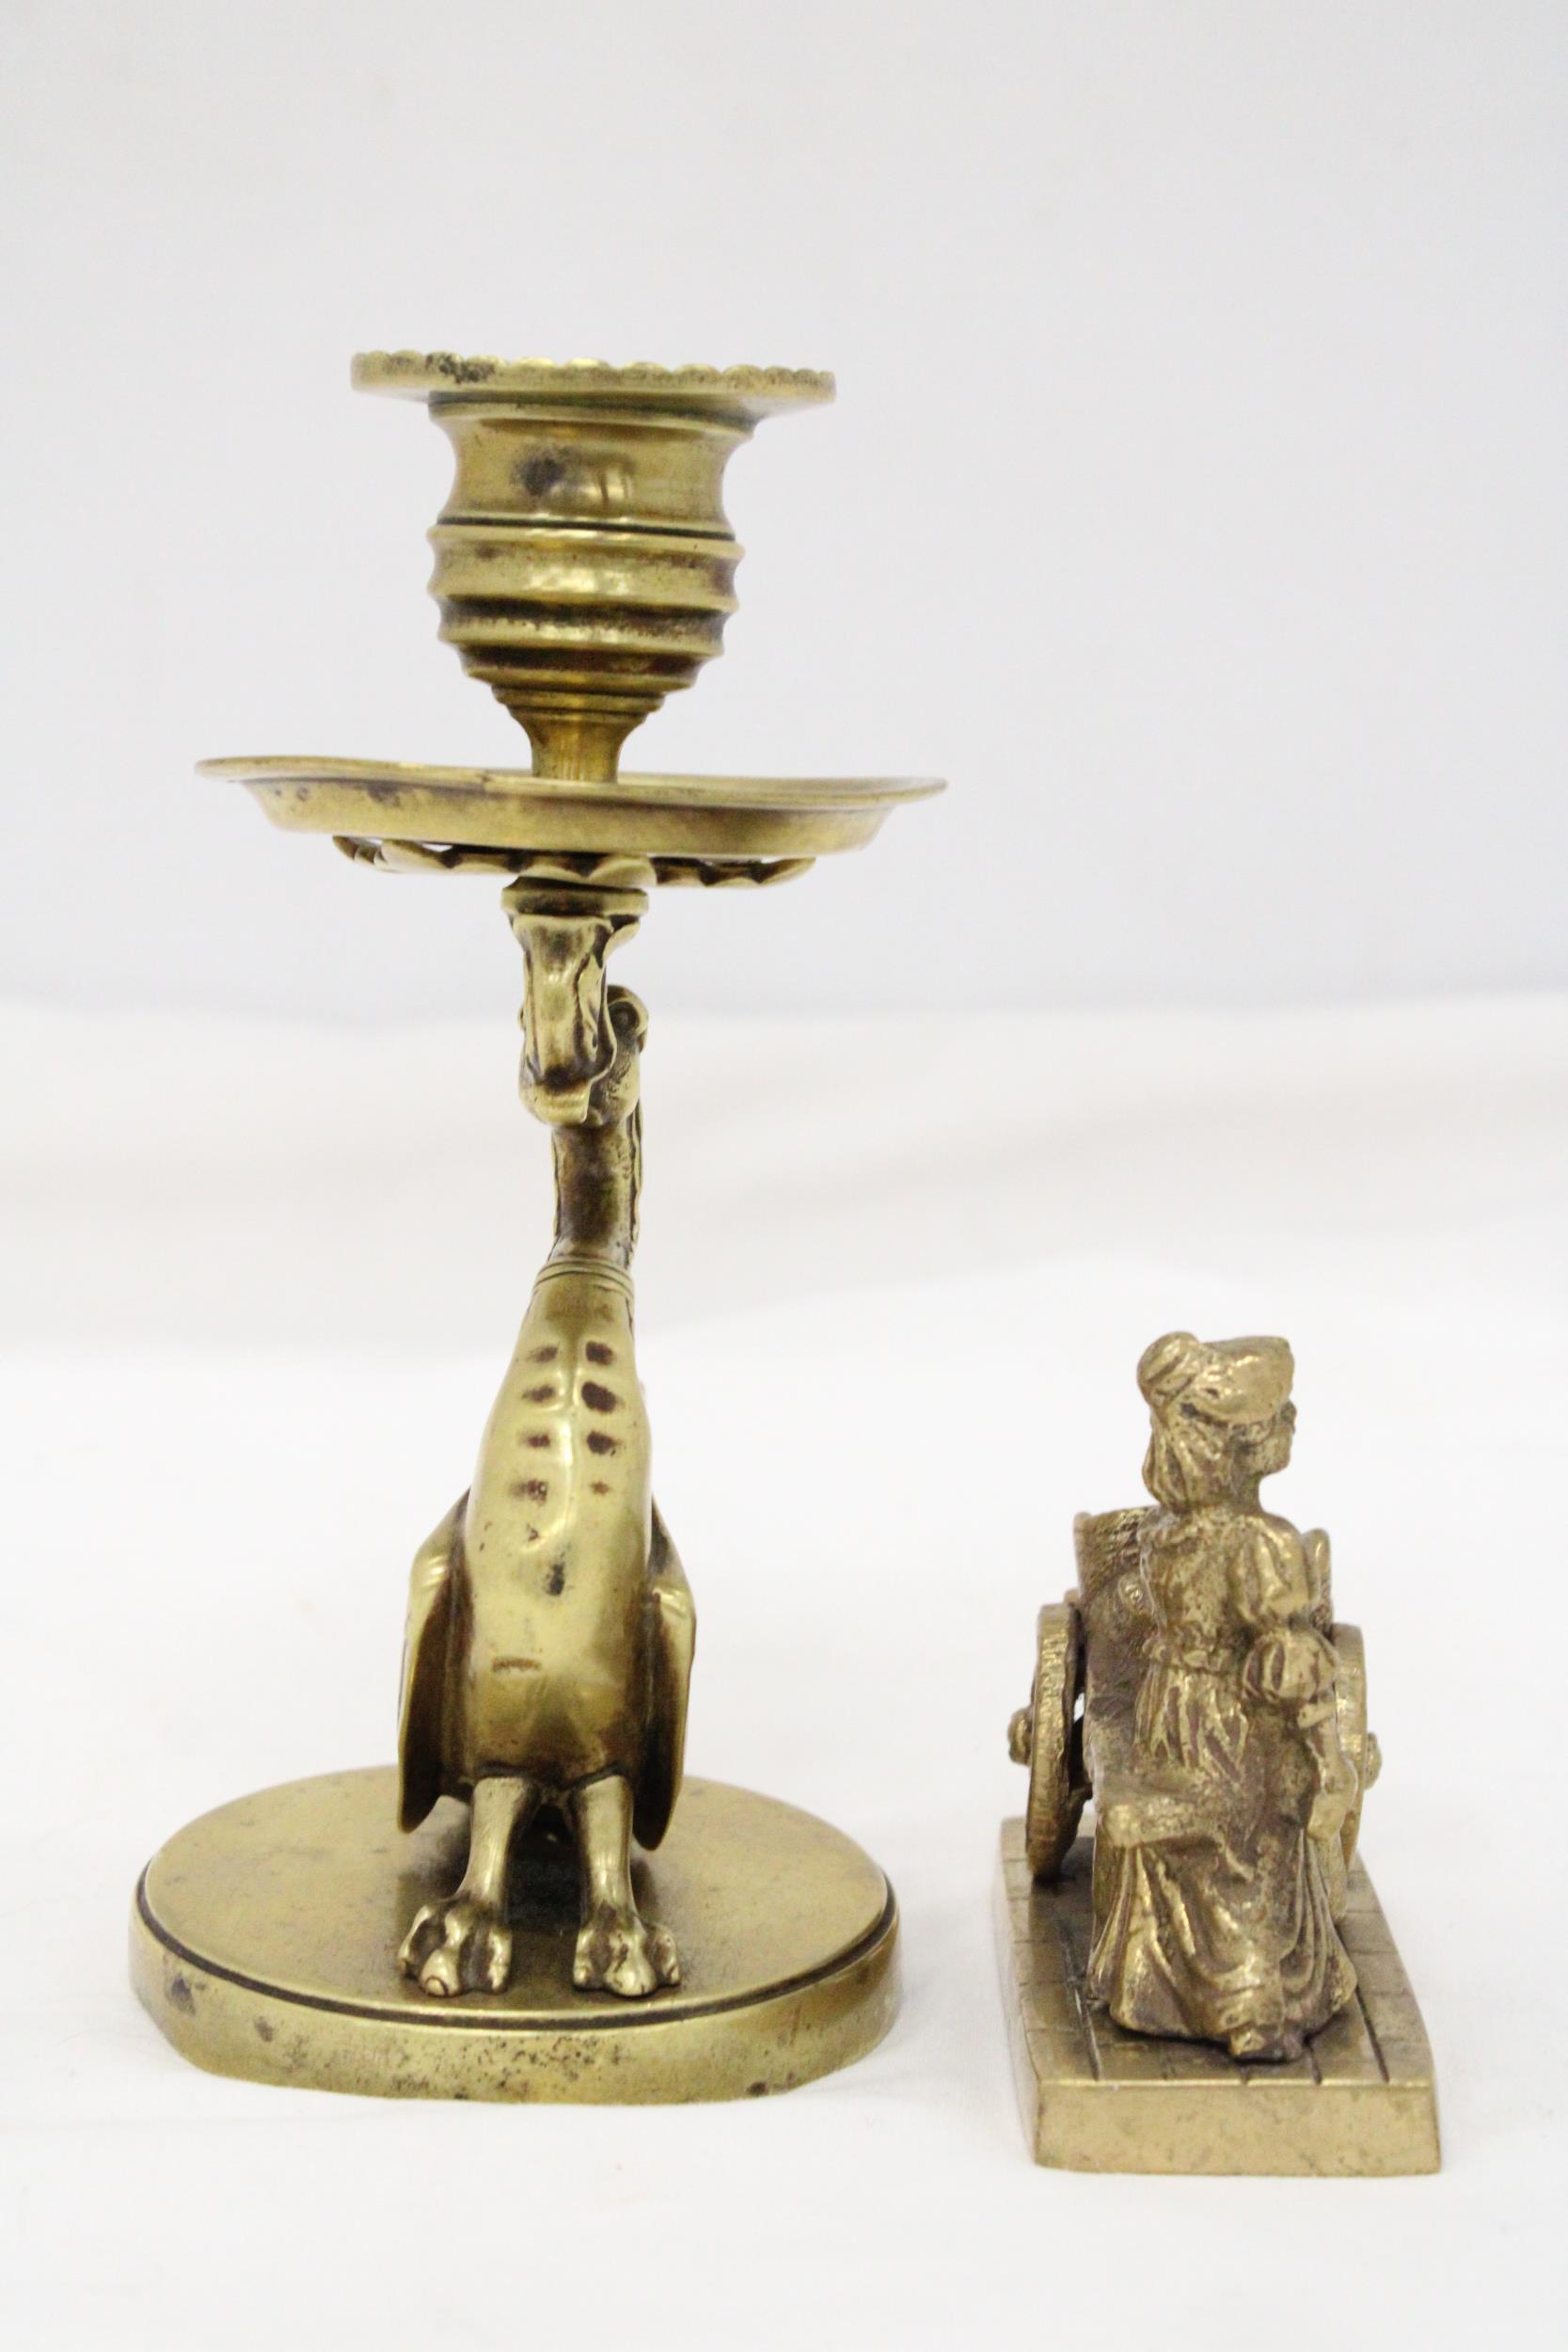 A VINTAGE BRASS GRYPHON CANDLESTICK PLUS A MOLLY MALONE FIGURE - Image 3 of 3